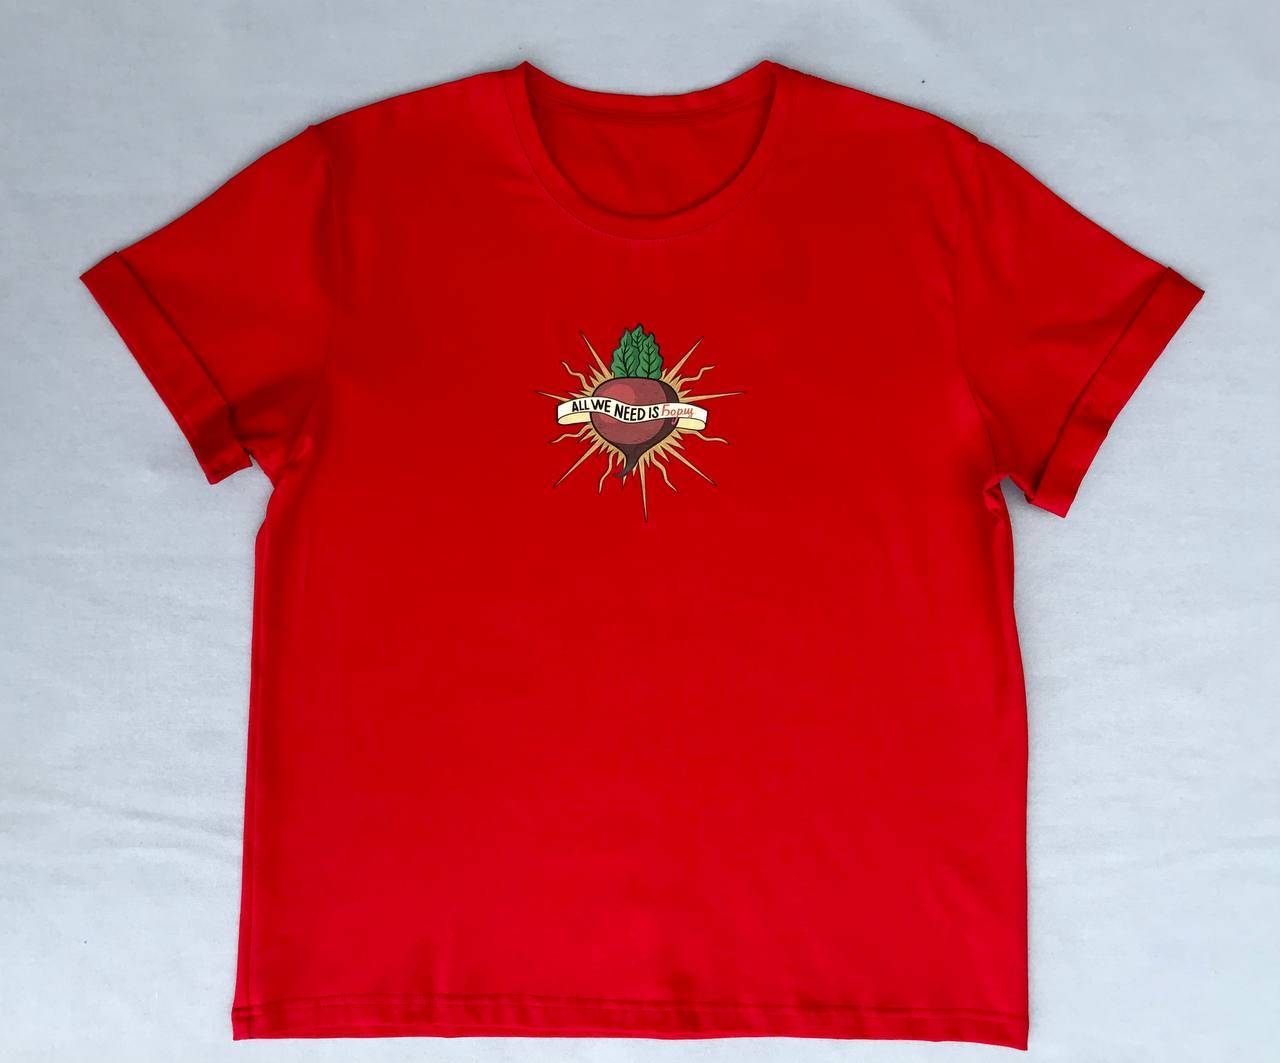 T-shirt with the logo "ALL WE NEED IS борщ", RED